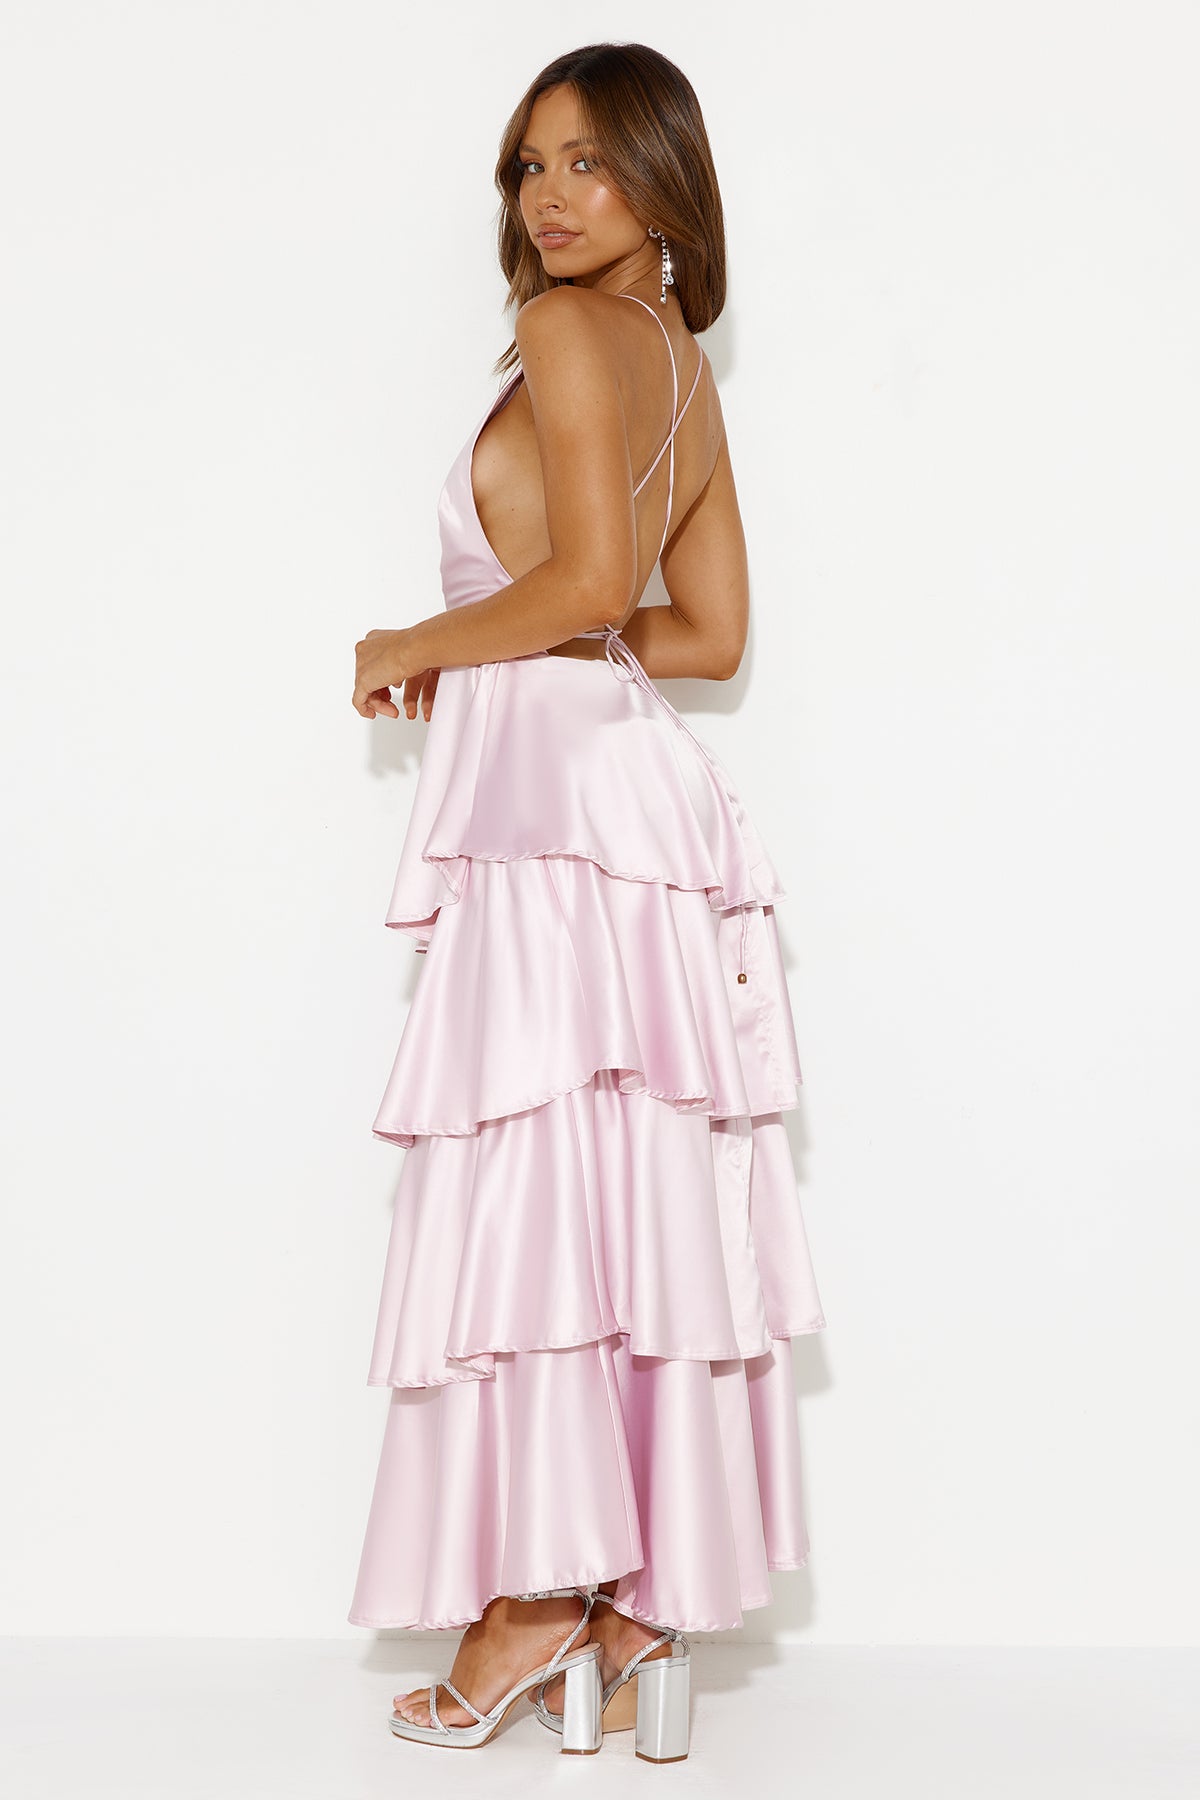 Shop Formal Dress - Party Of The Year Satin Maxi Dress Light Pink sixth image